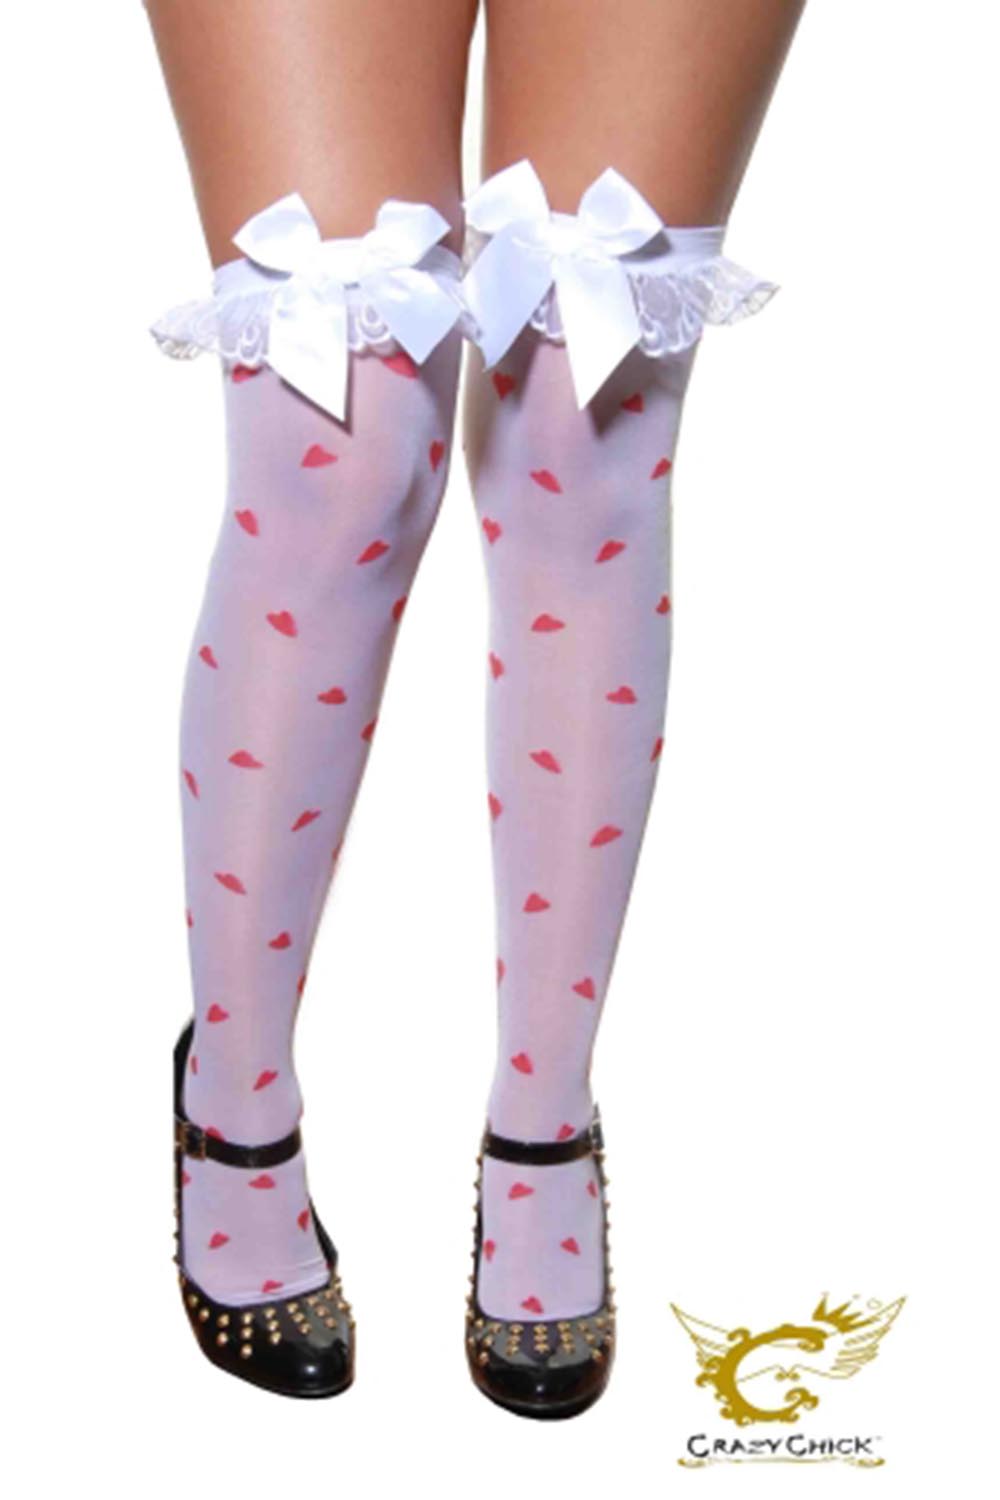 Crazy Chick White Stockings with printed heart and White Bow